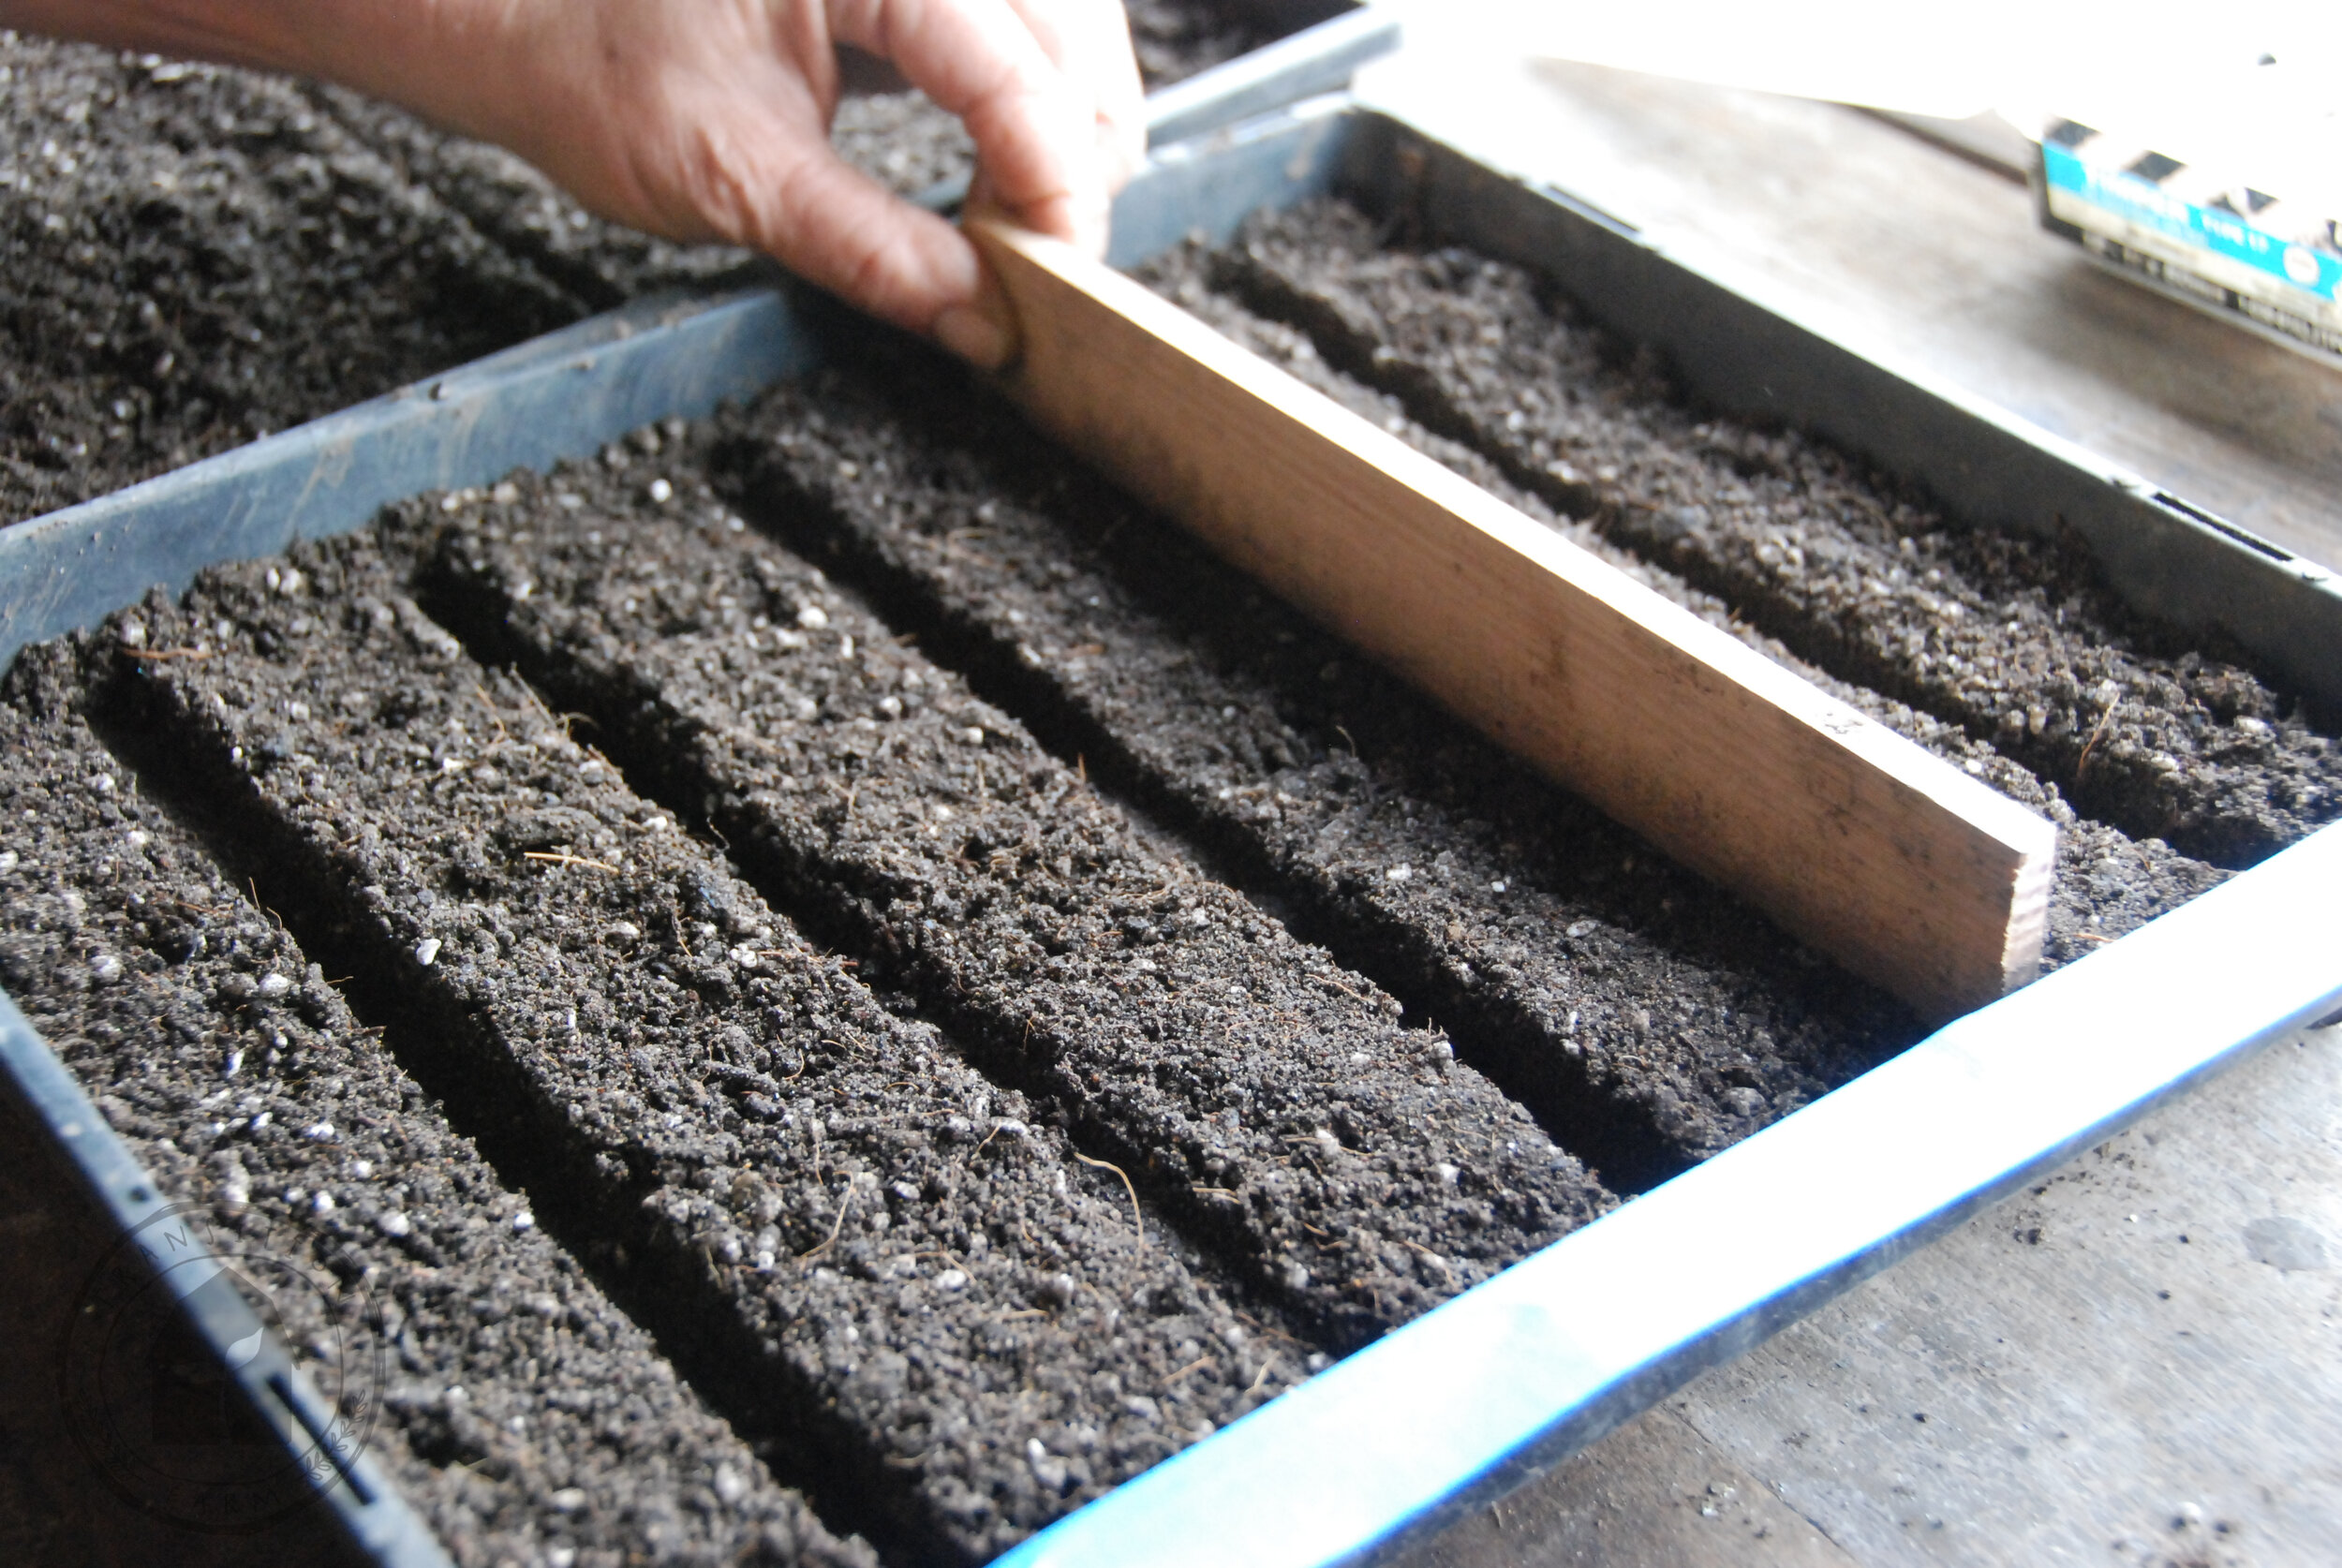    SPACE - Evenly divide your lines. We find 5 lines in a 35*30cm tray works for most seeds.     DEPTH - Create the correct depth in each line.  We use a piece of wood cut to fit the width of the tray.  